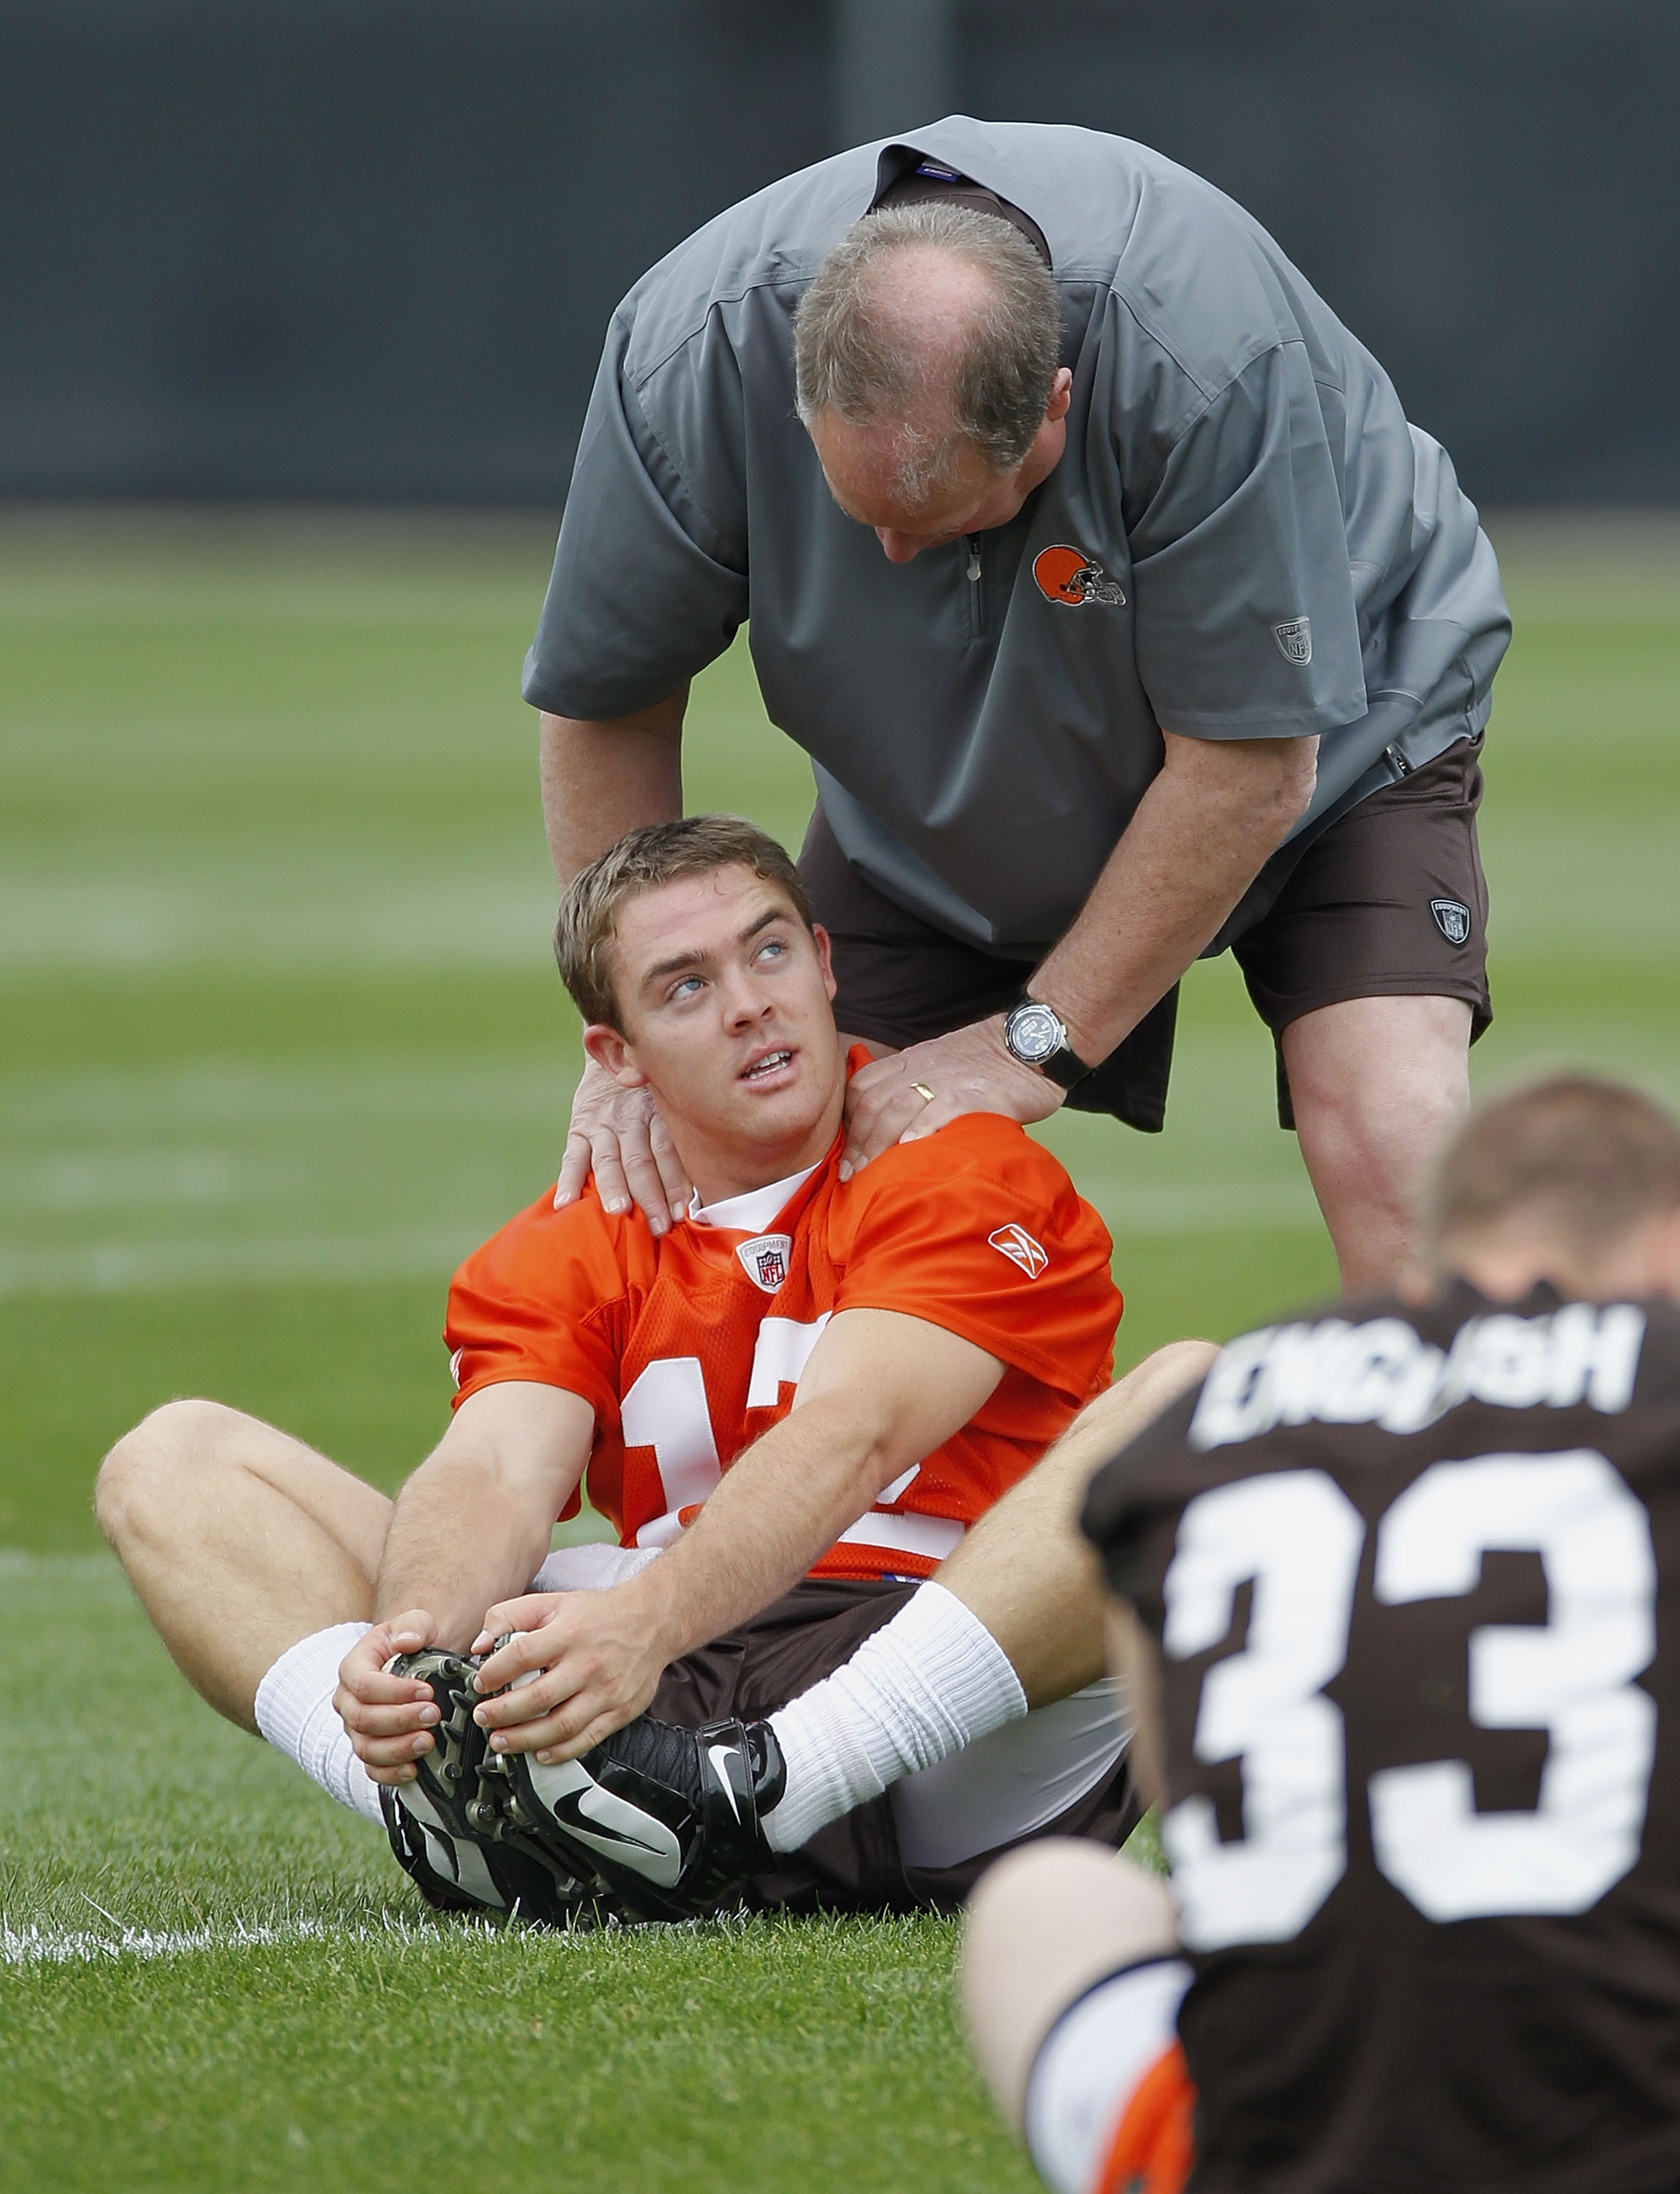 BEREA, OH - MAY 01:  Colt McCoy #12 of the Cleveland Browns talks with team president Mike Holmgren during rookie mini camp at the Cleveland Browns Training and Administrative Complex on May 1, 2010 in Berea, Ohio.  (Photo by Gregory Shamus/Getty Images)